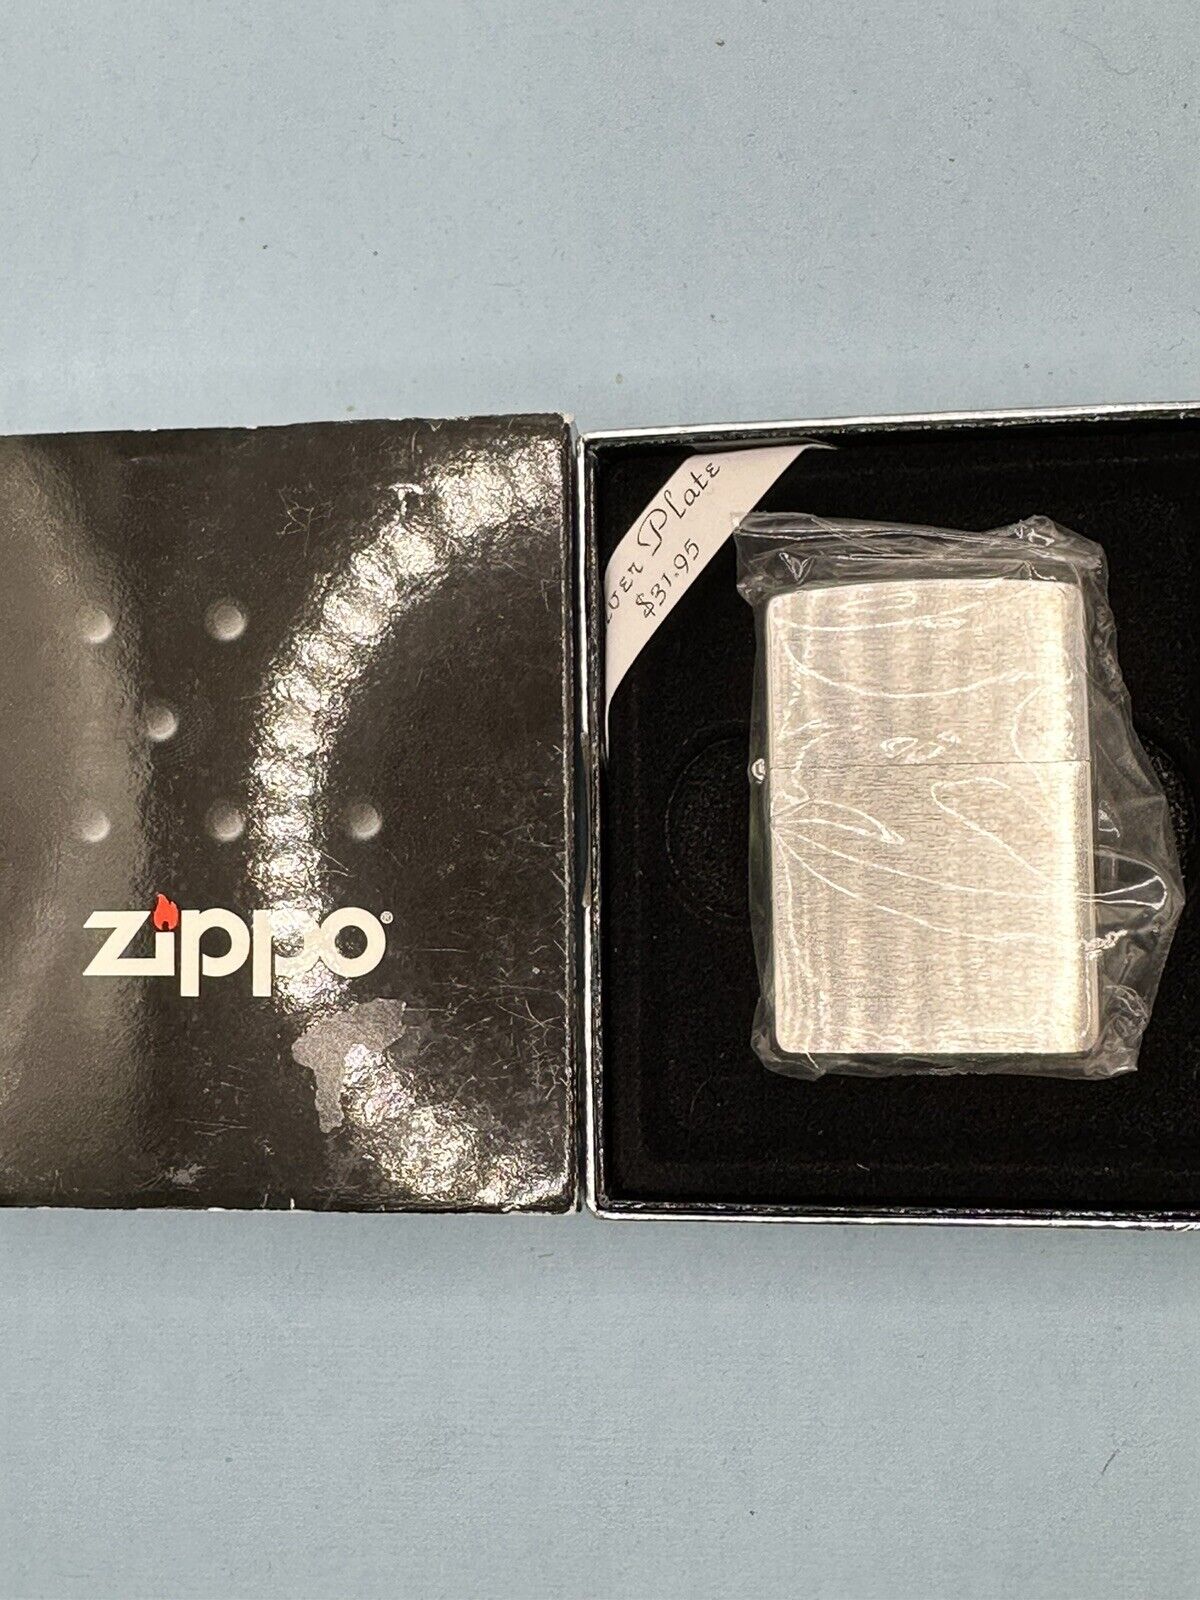 Vintage 2008 Silver Plated Zippo Lighter NEW In Original Box